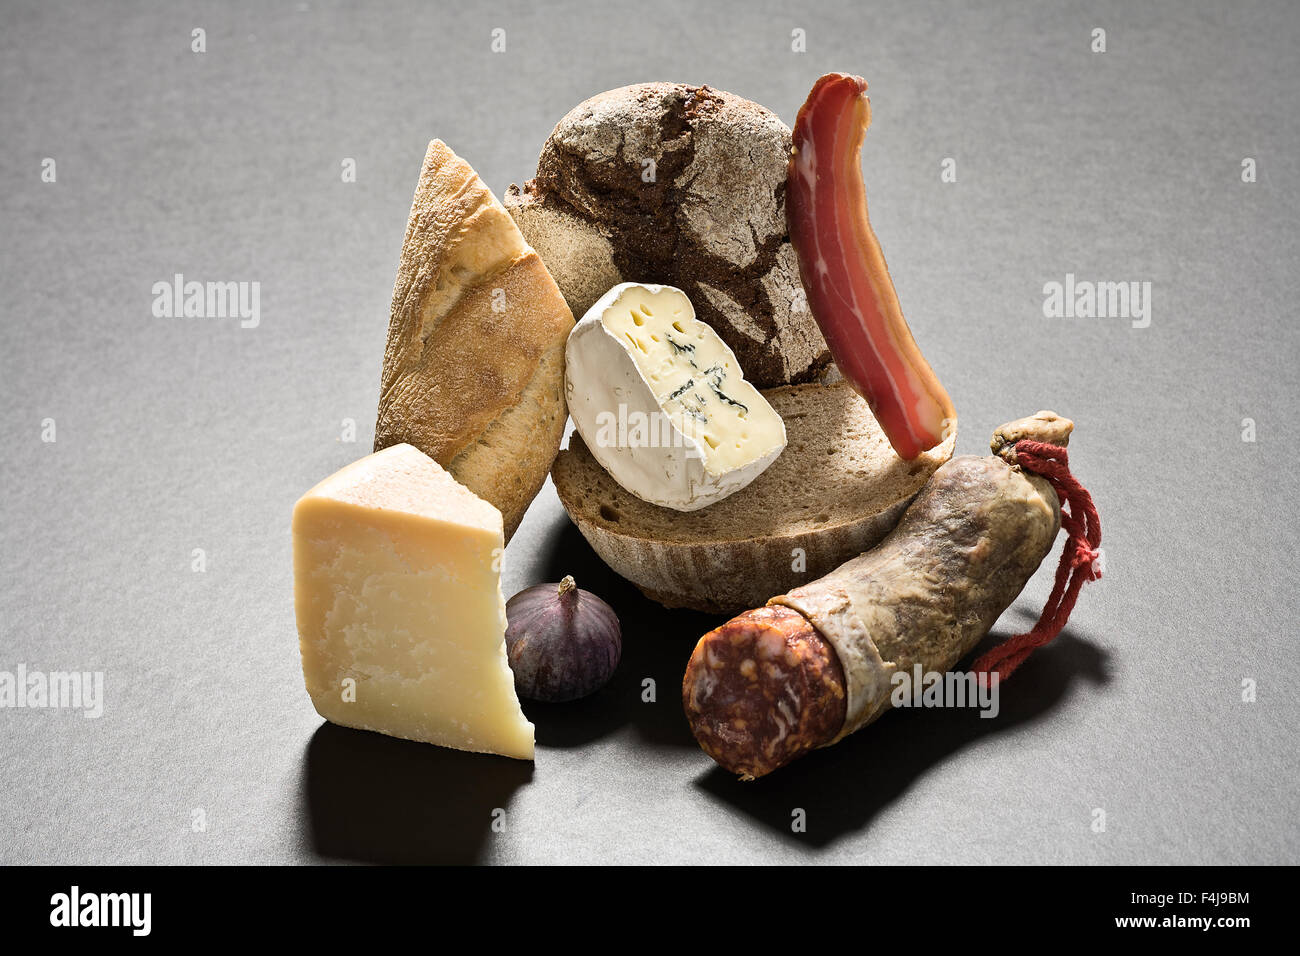 Bread and charcuterie, still life. Stock Photo